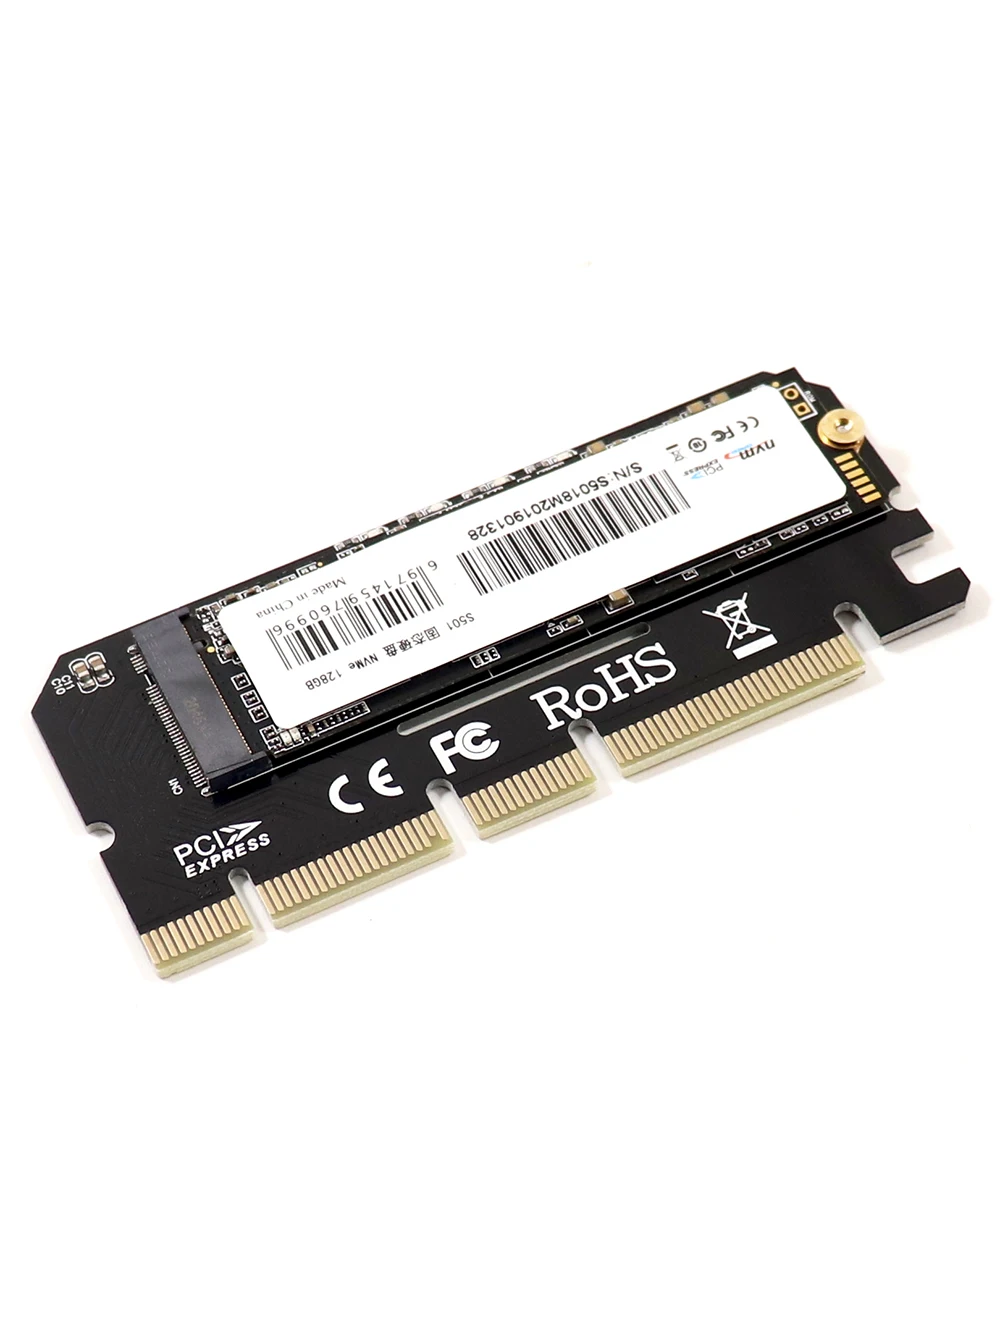 PCI express PCI e to M2 NVME M Key Converter M.2 2230 2242 2260 2280 SSD Adapter Add On Cards Support PCIe X4 X8 X16